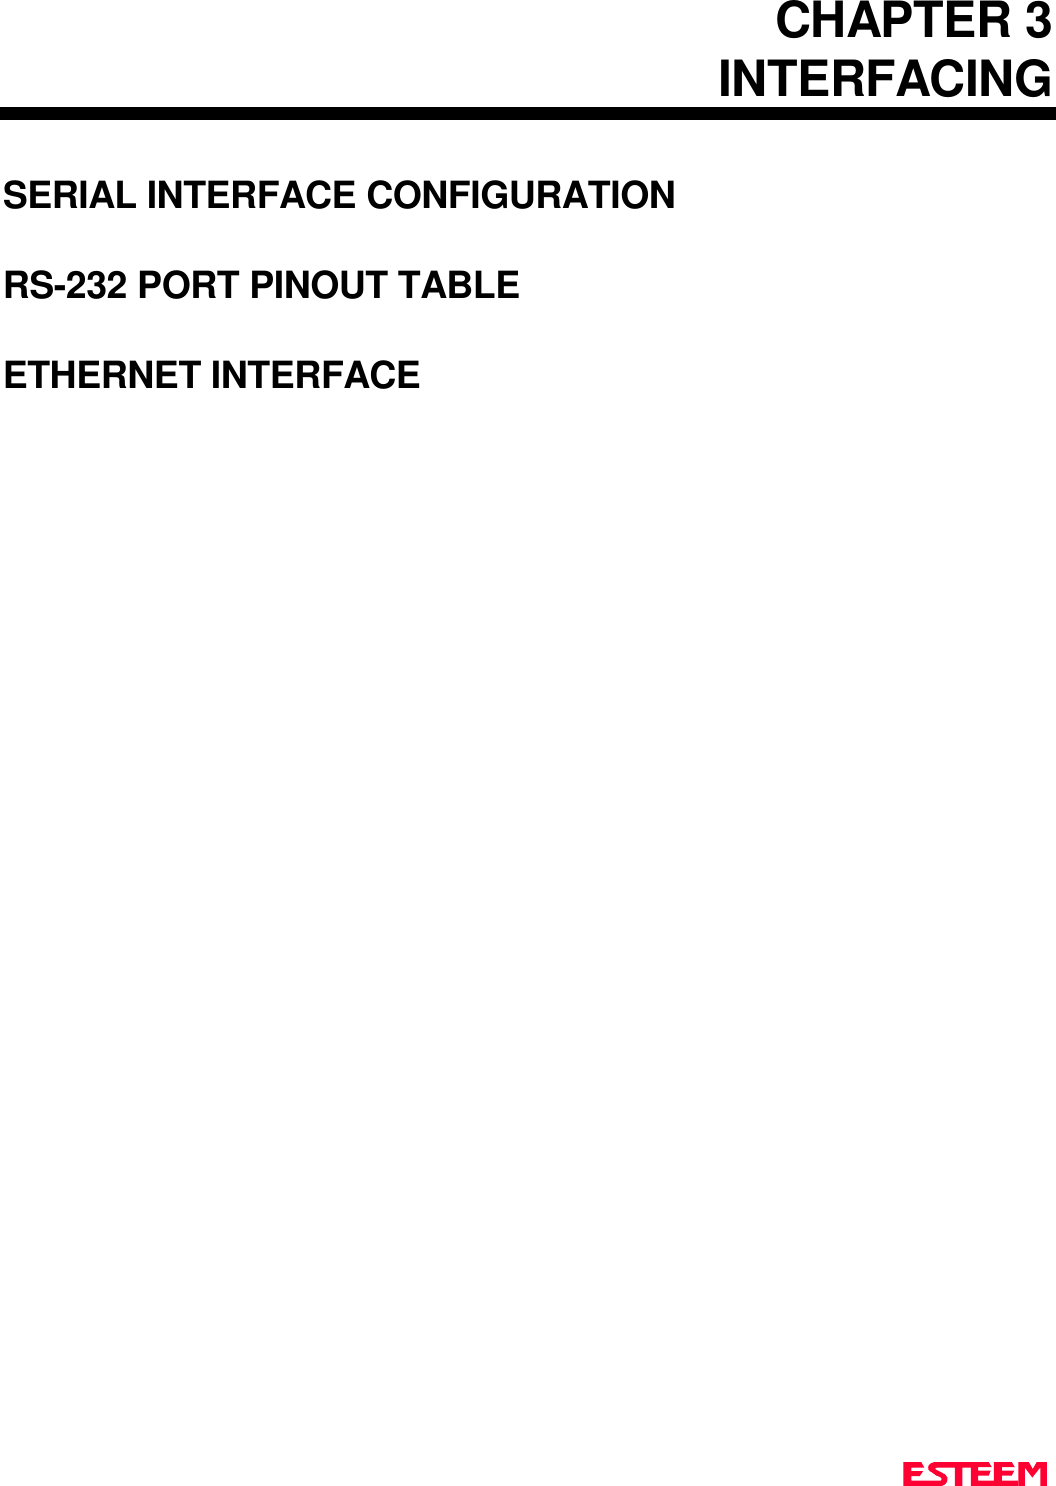 CHAPTER 3INTERFACINGSERIAL INTERFACE CONFIGURATIONRS-232 PORT PINOUT TABLEETHERNET INTERFACE